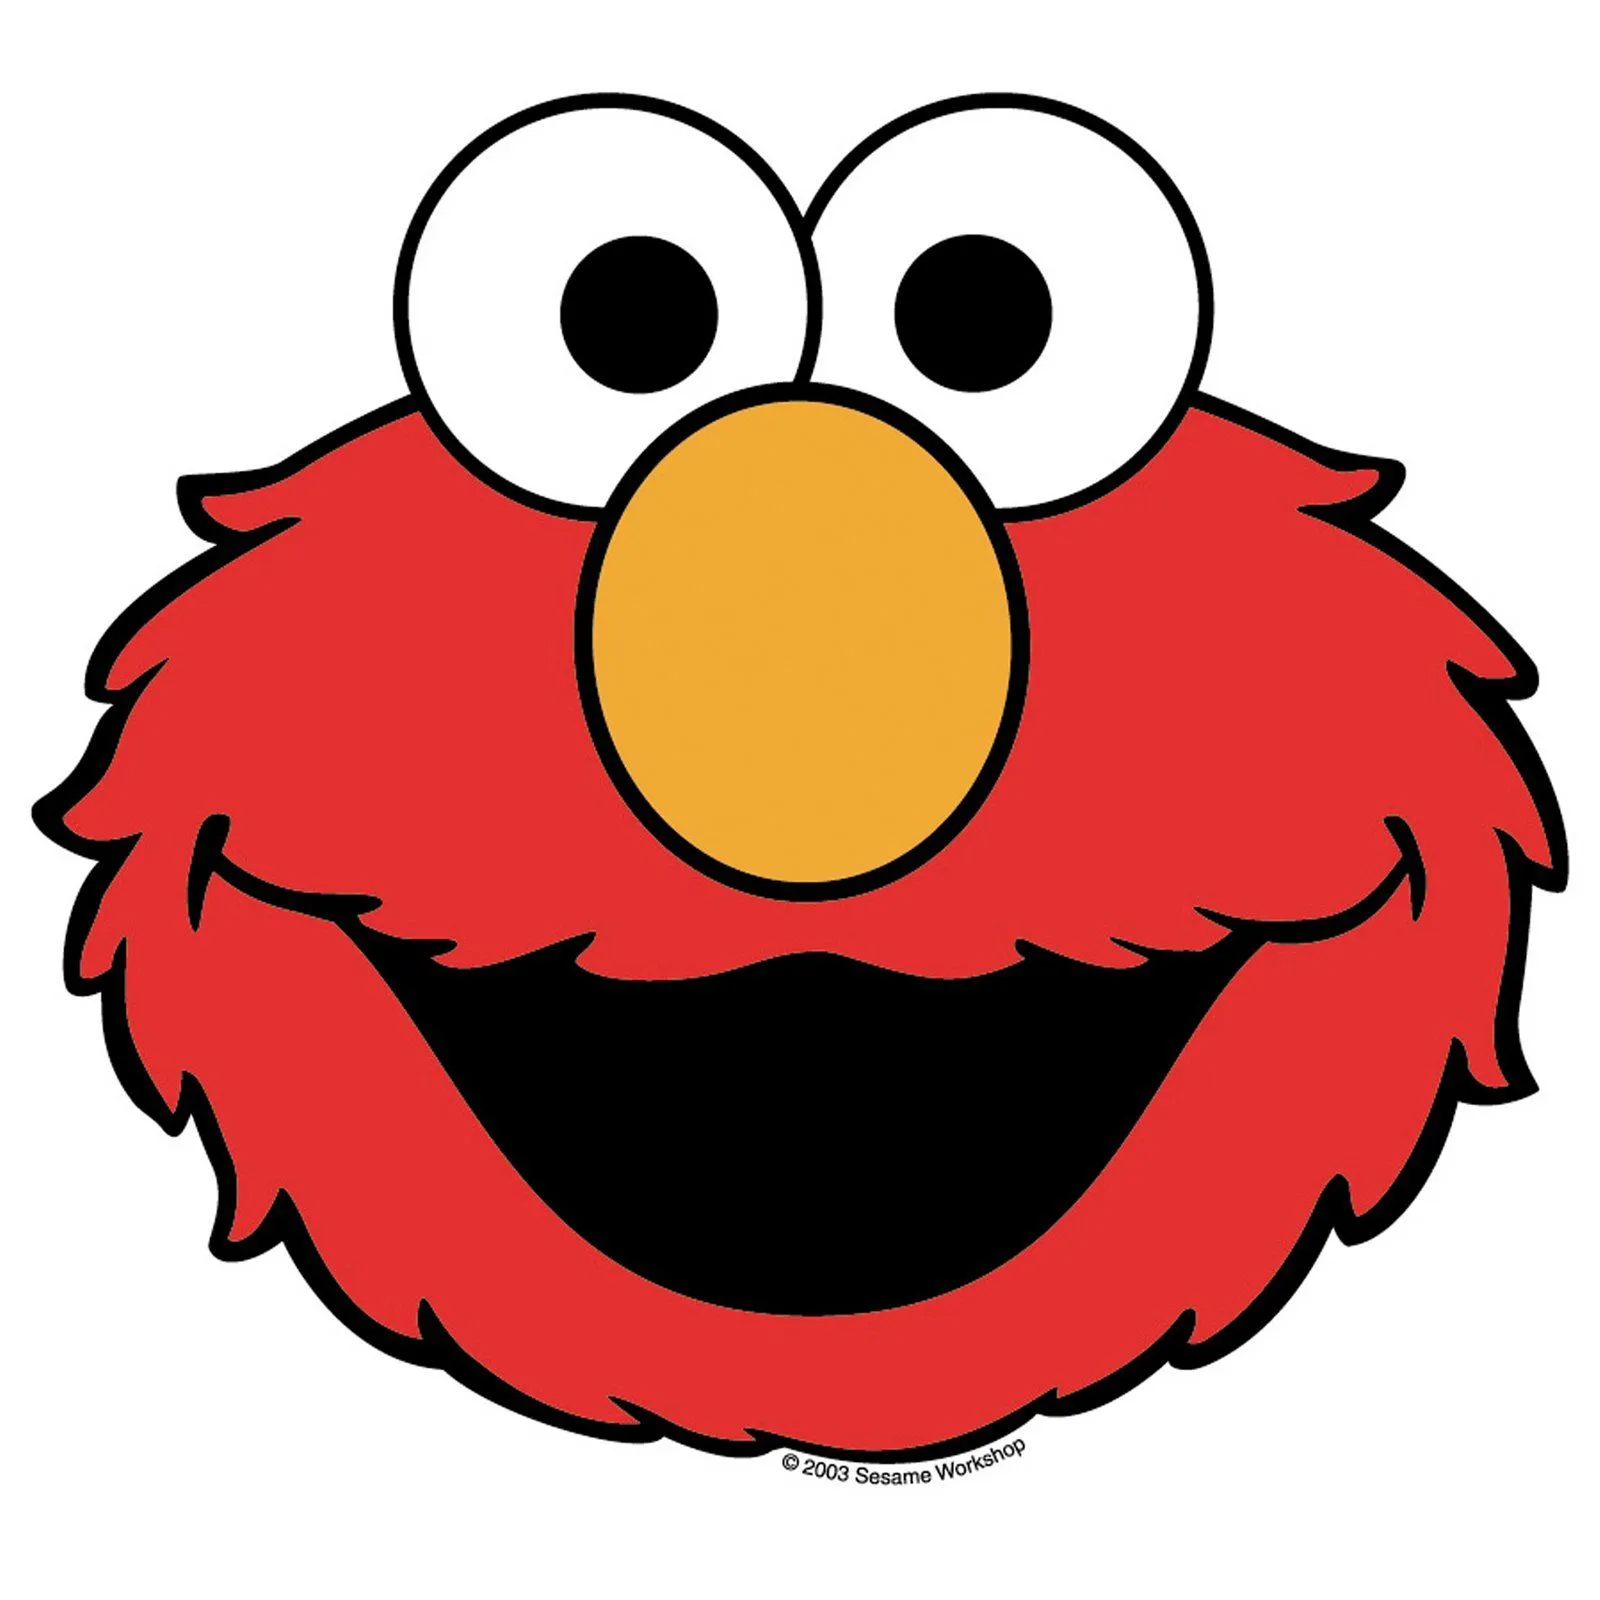 Elmo tapety wallpapers (9)